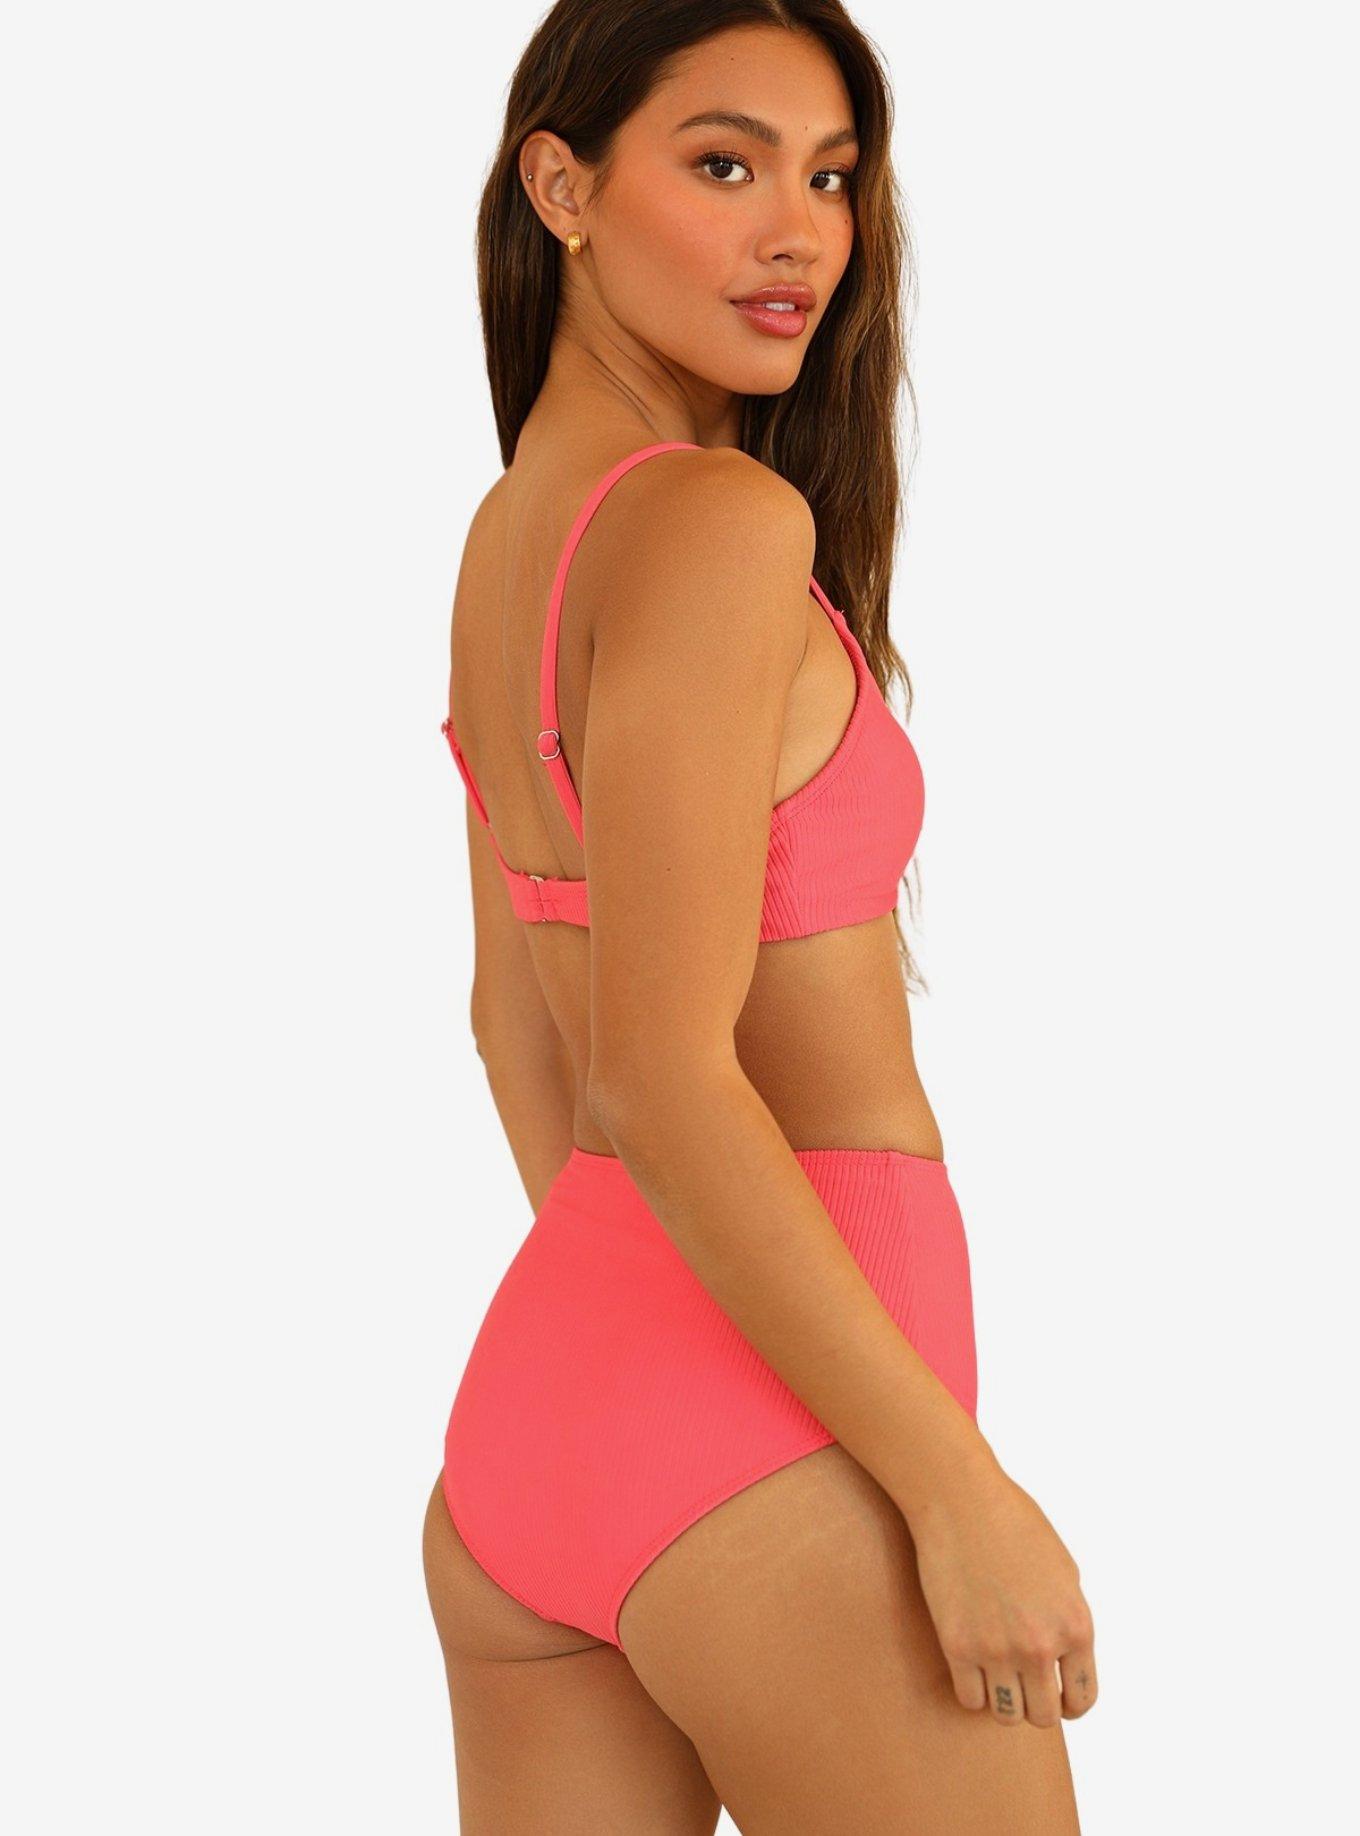 Dippin' Daisy's Zen Swim Top Calypso Coral Pink Ribbed, CORAL PINK-CORAL, alternate